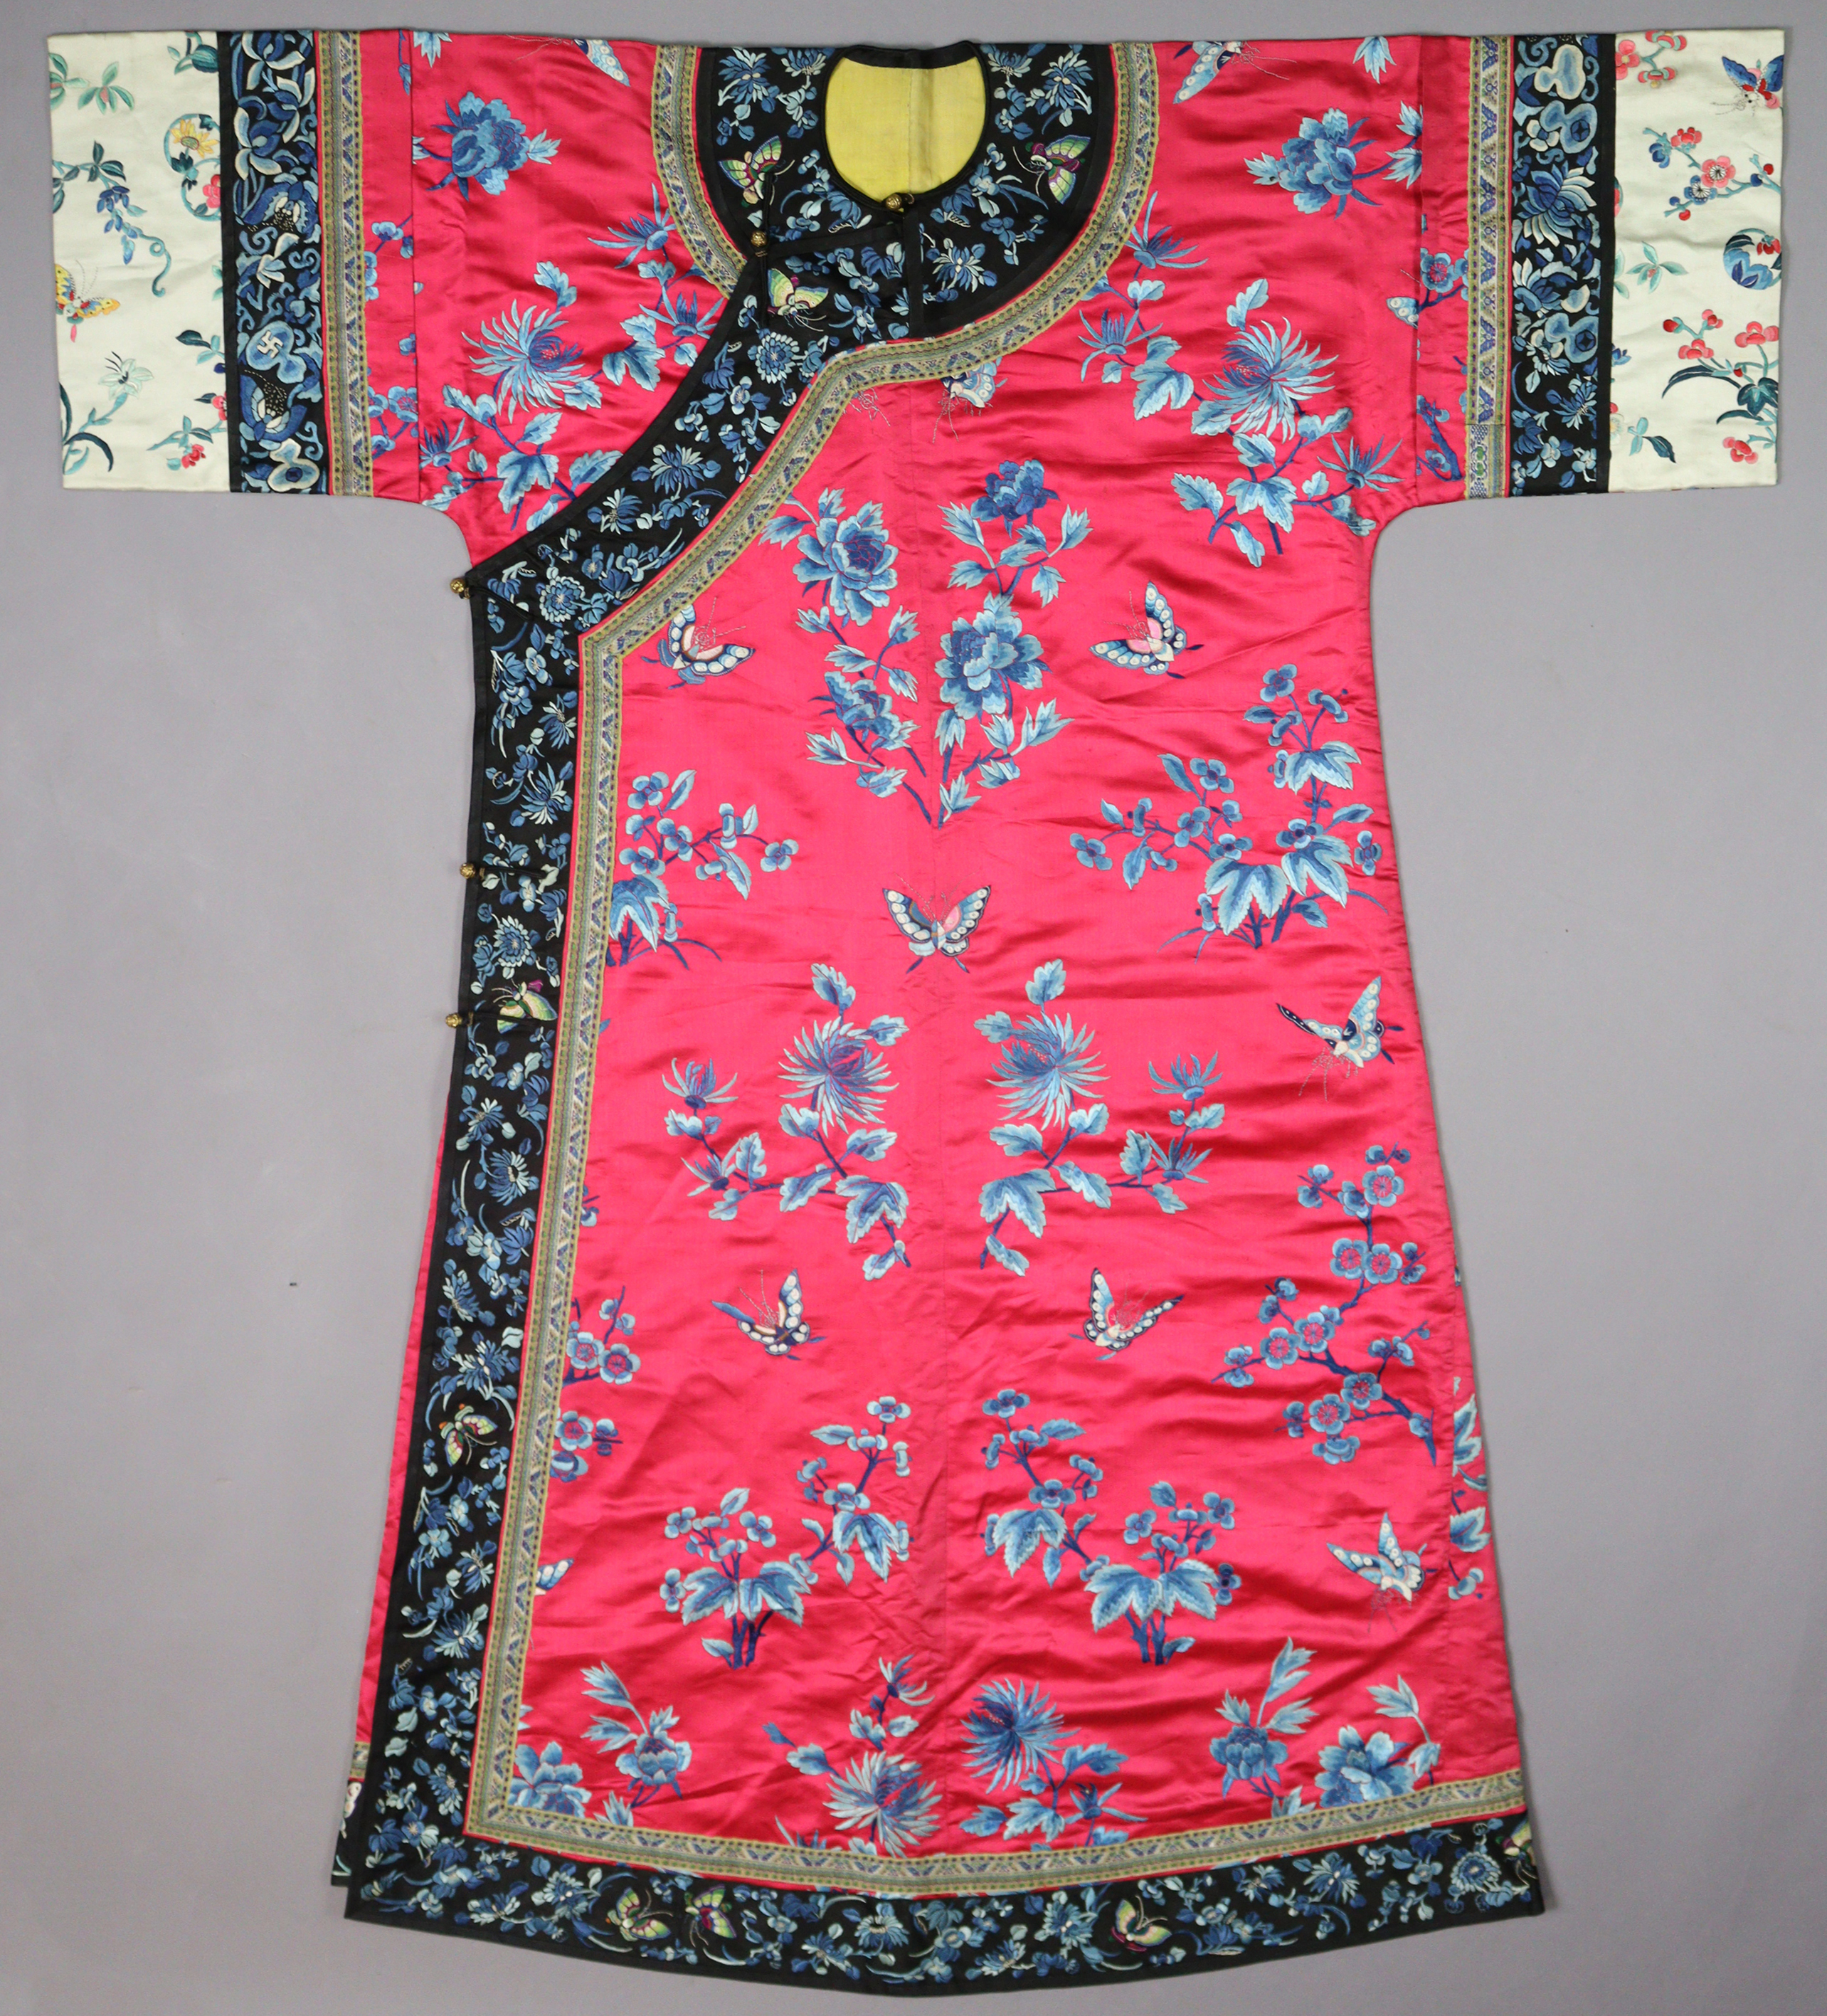 A LATE 19th CENTURY CHINESE SILK INFORMAL LADY’S ROBE, of pink ground with all-over embroidered